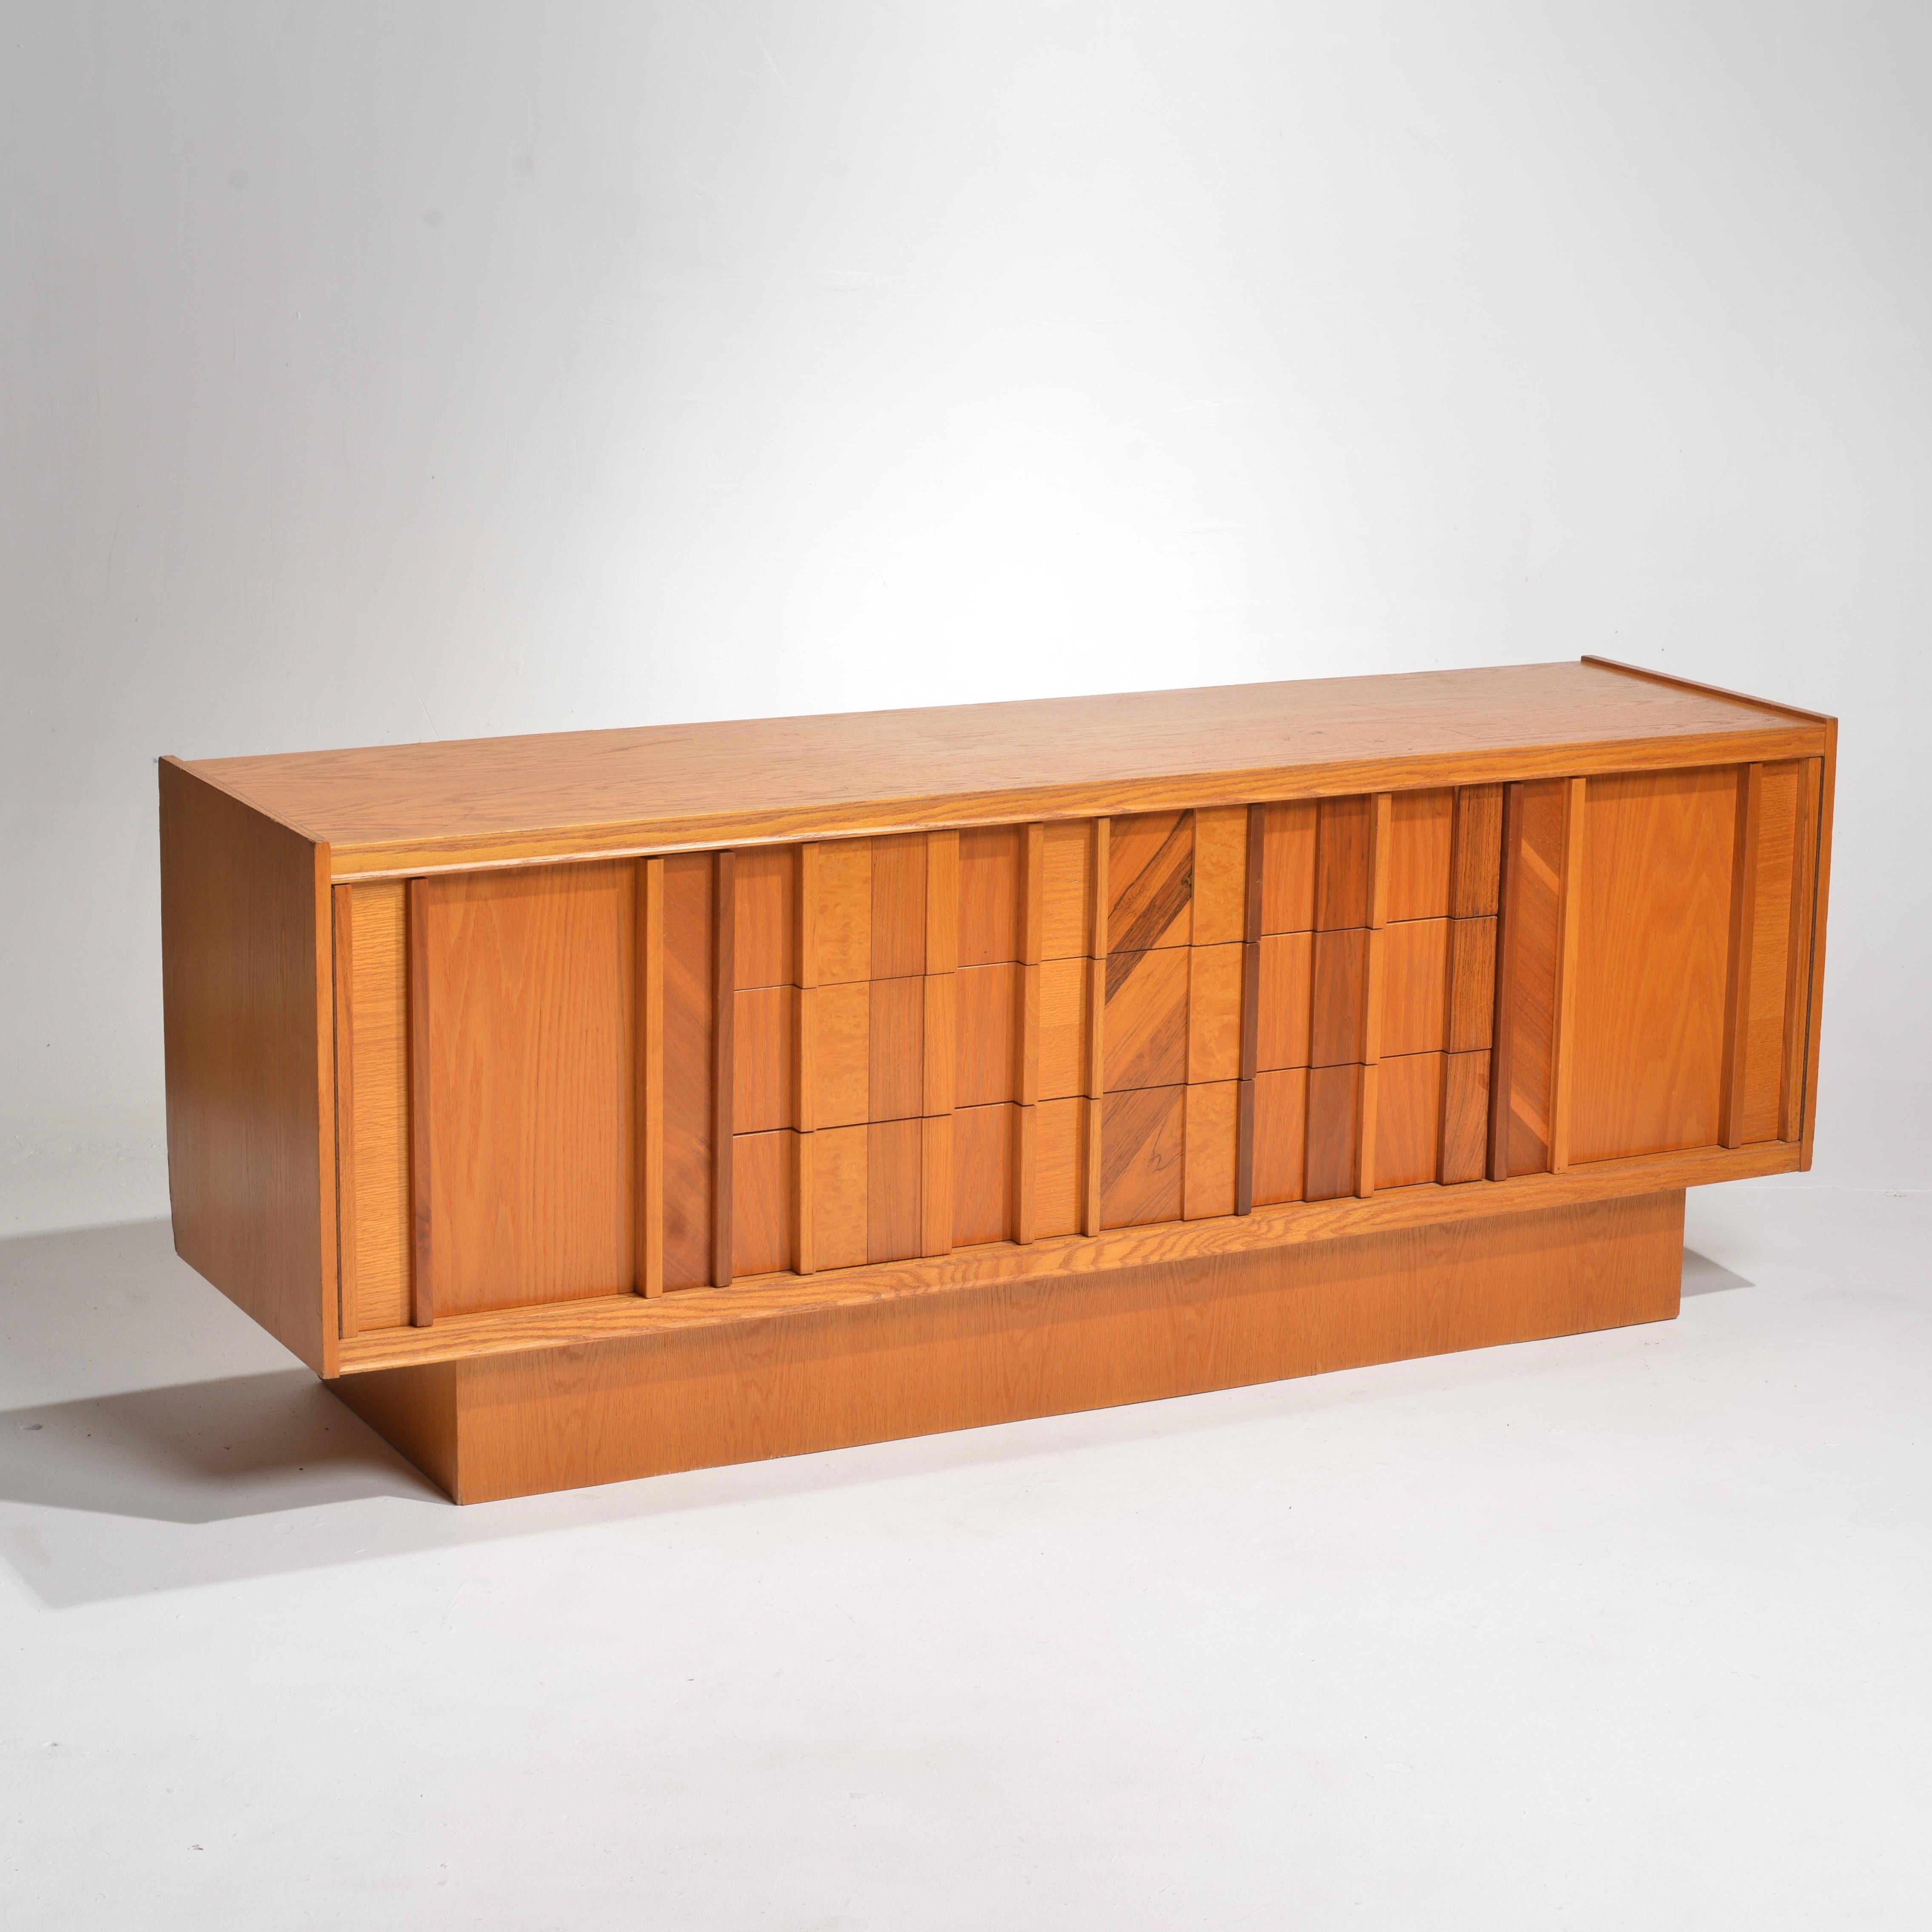 This stunning Vintage Brutalist Credenza Dresser features a bold yet classic combination of Maple Burl, Walnut, Rosewood, and Oak. The design is decorated with striking geometric patterns and sculptural elements that give it a bold and unique look.